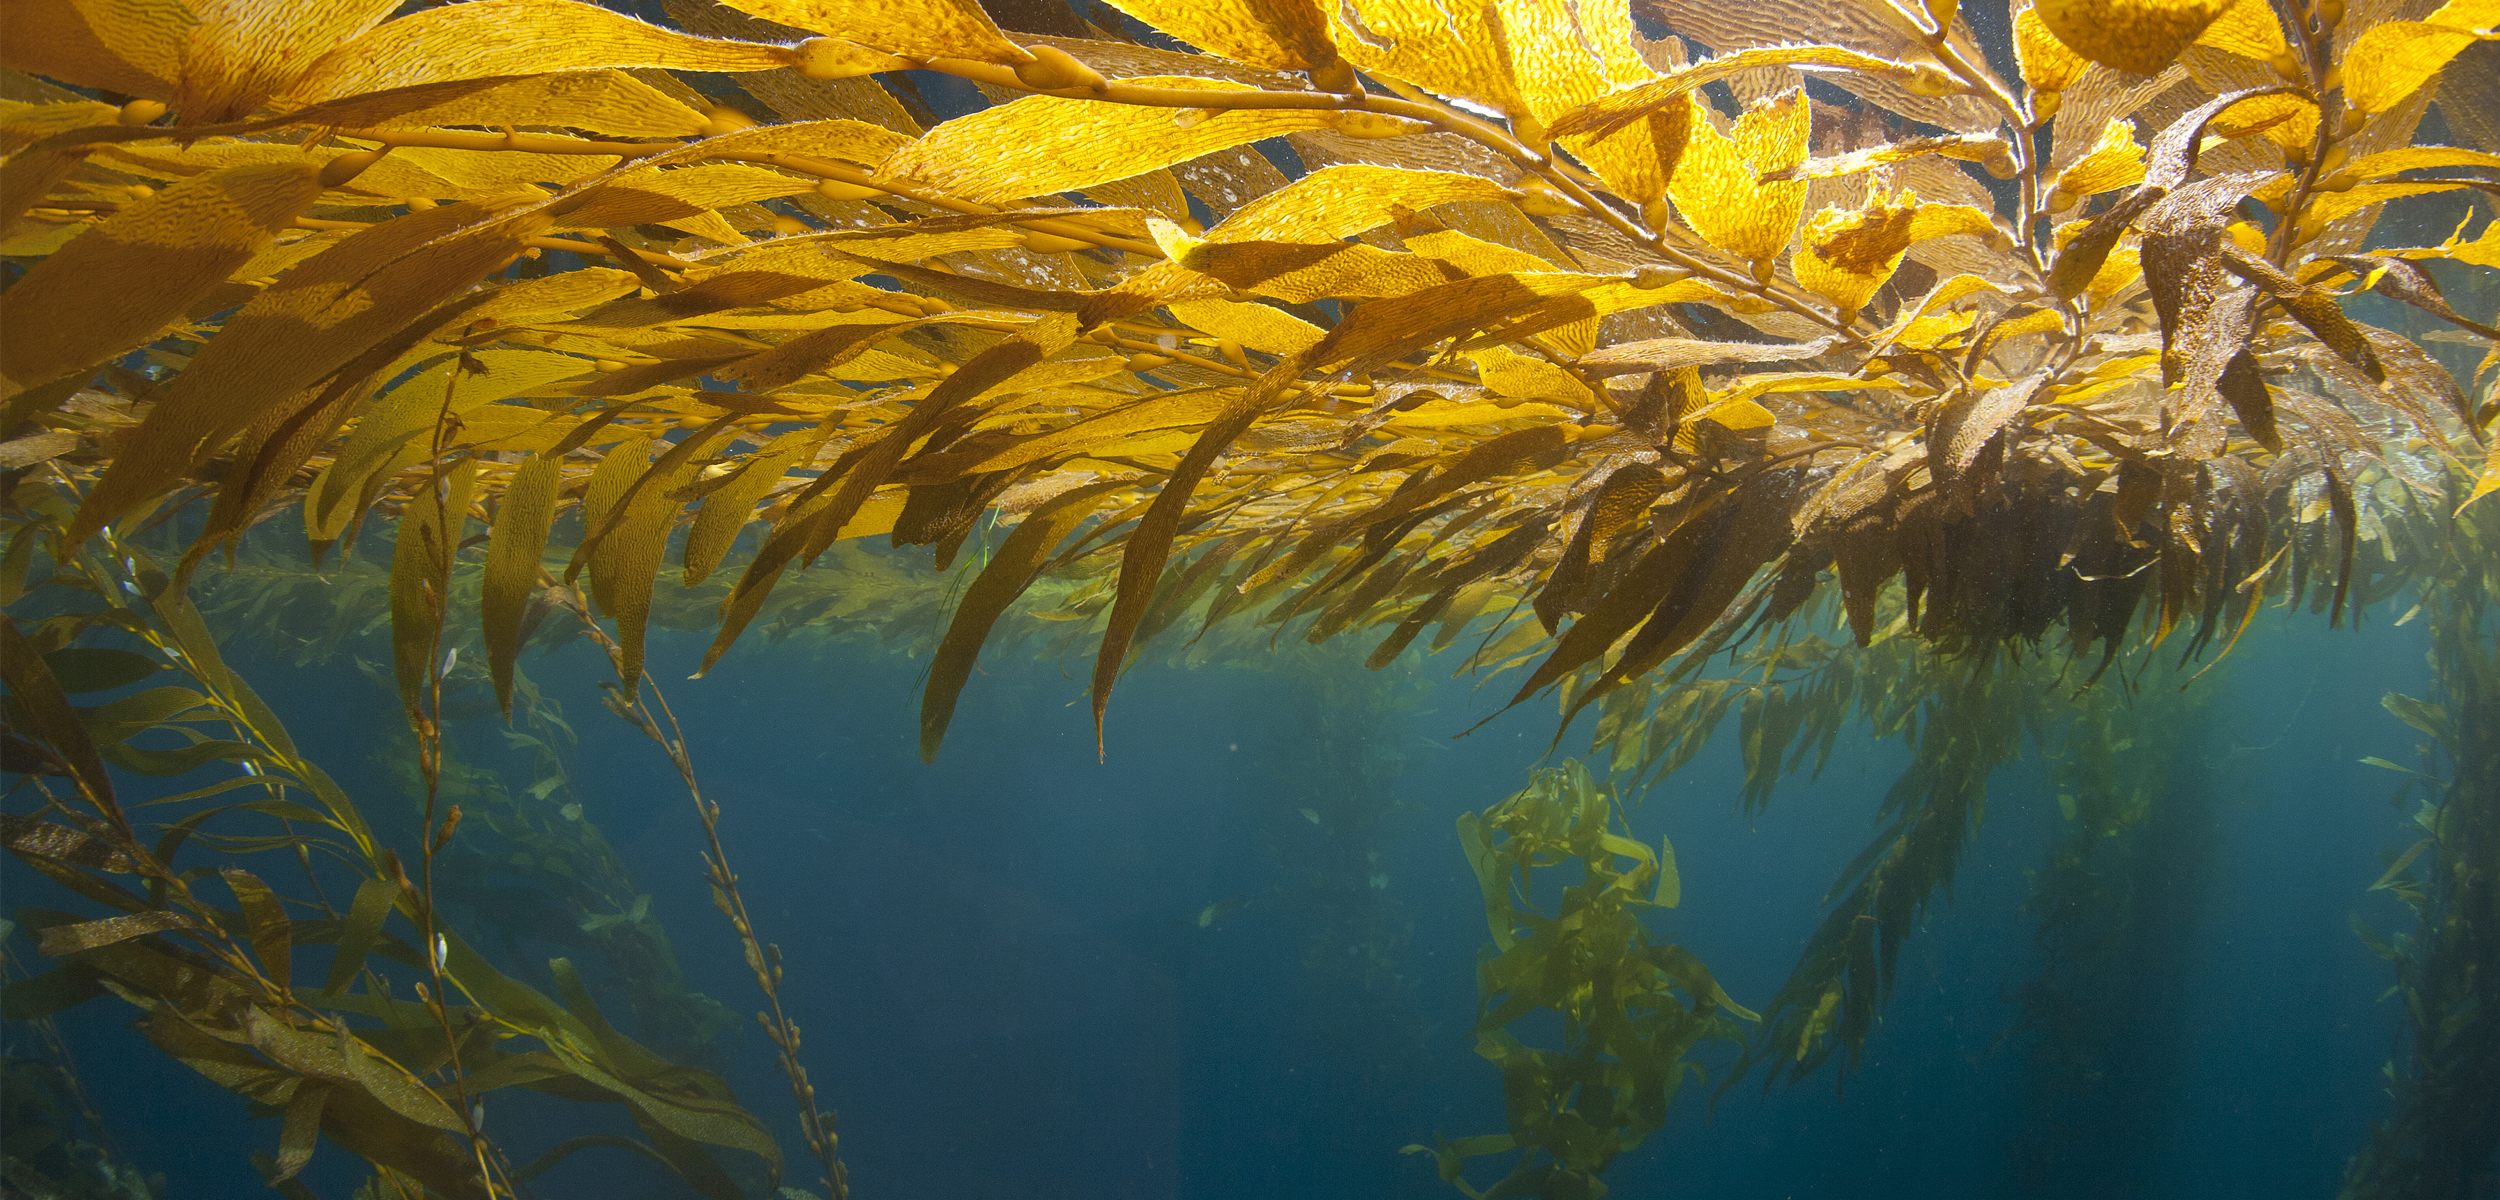 Giant golden kelp sits at the top of the image. The blue ocean sits below with more kelp in the background